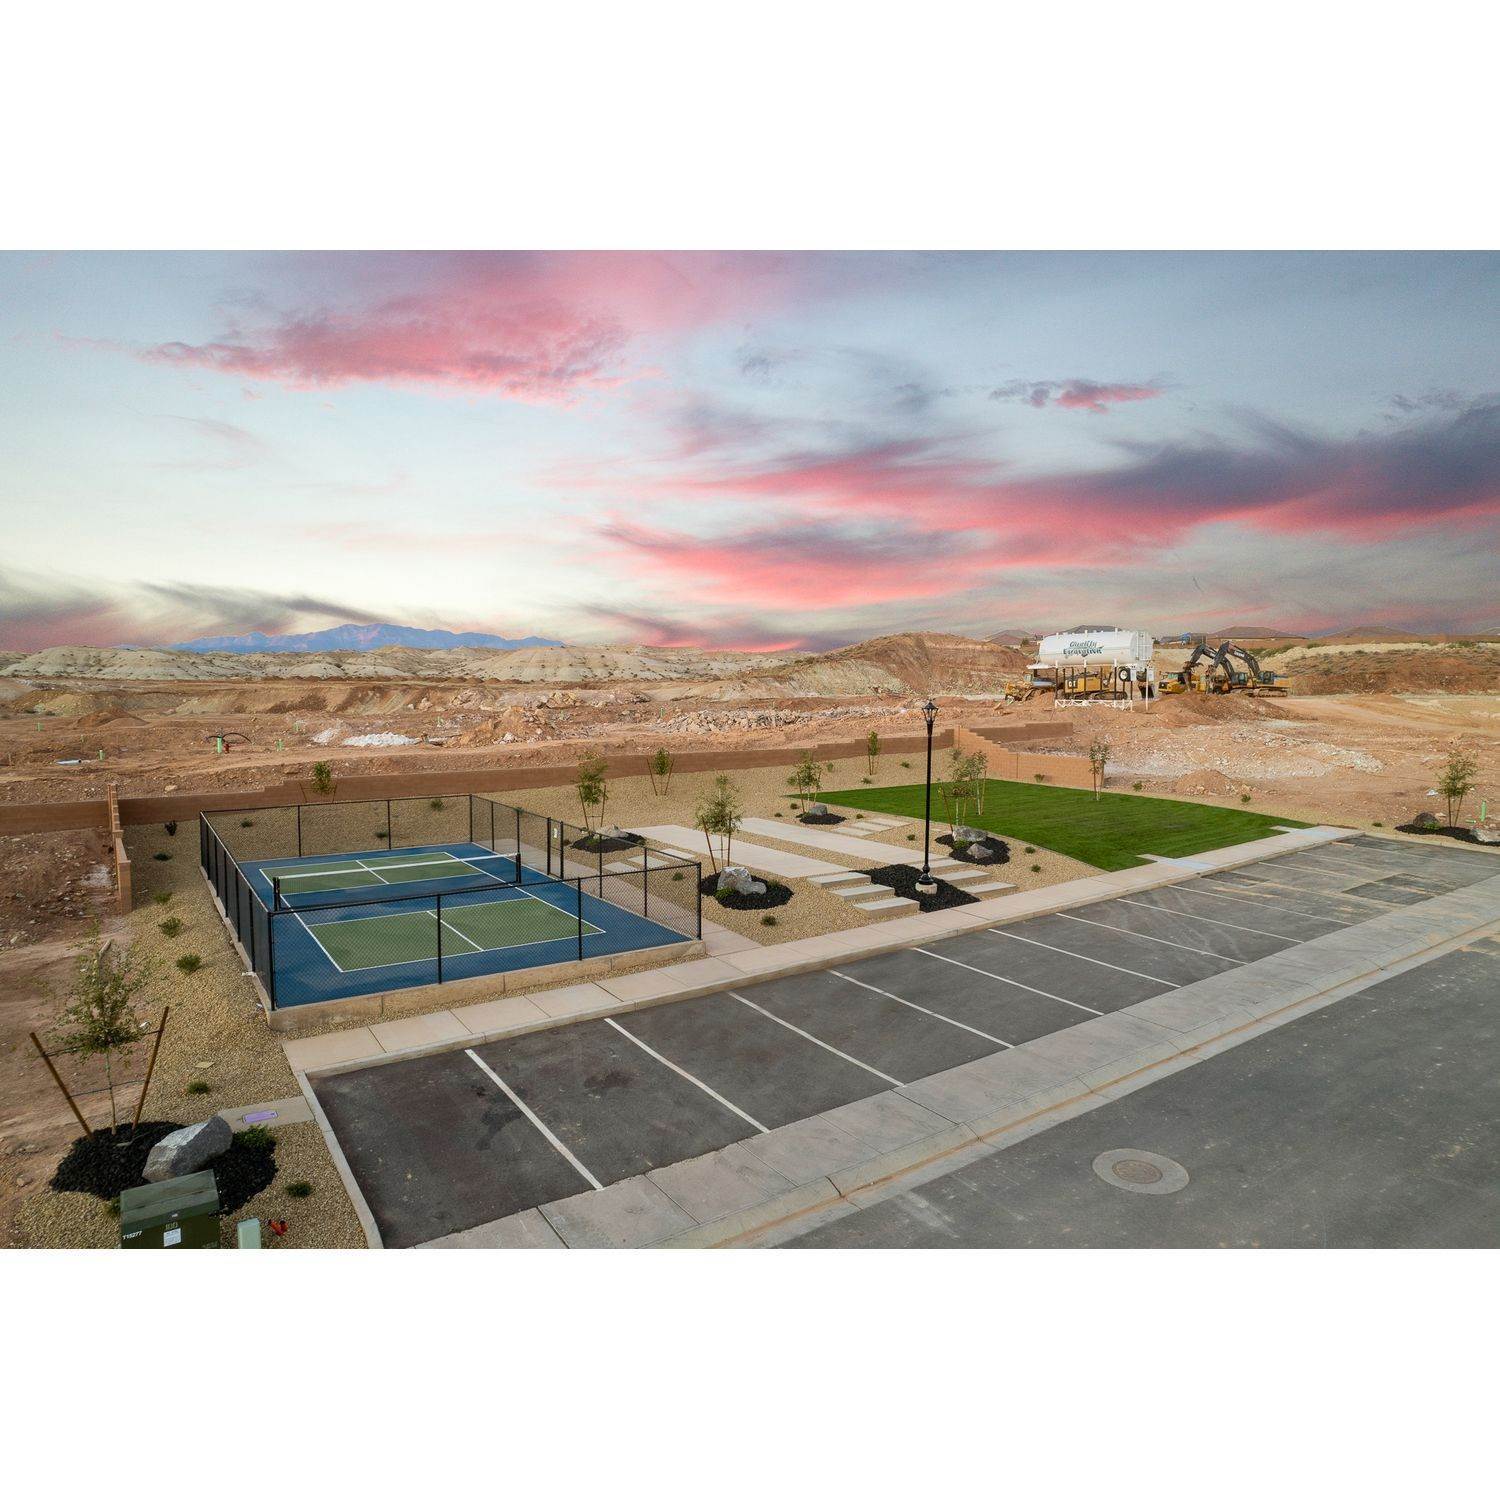 4. building at 6068 S. White Trails Dr., St. George, UT 84790